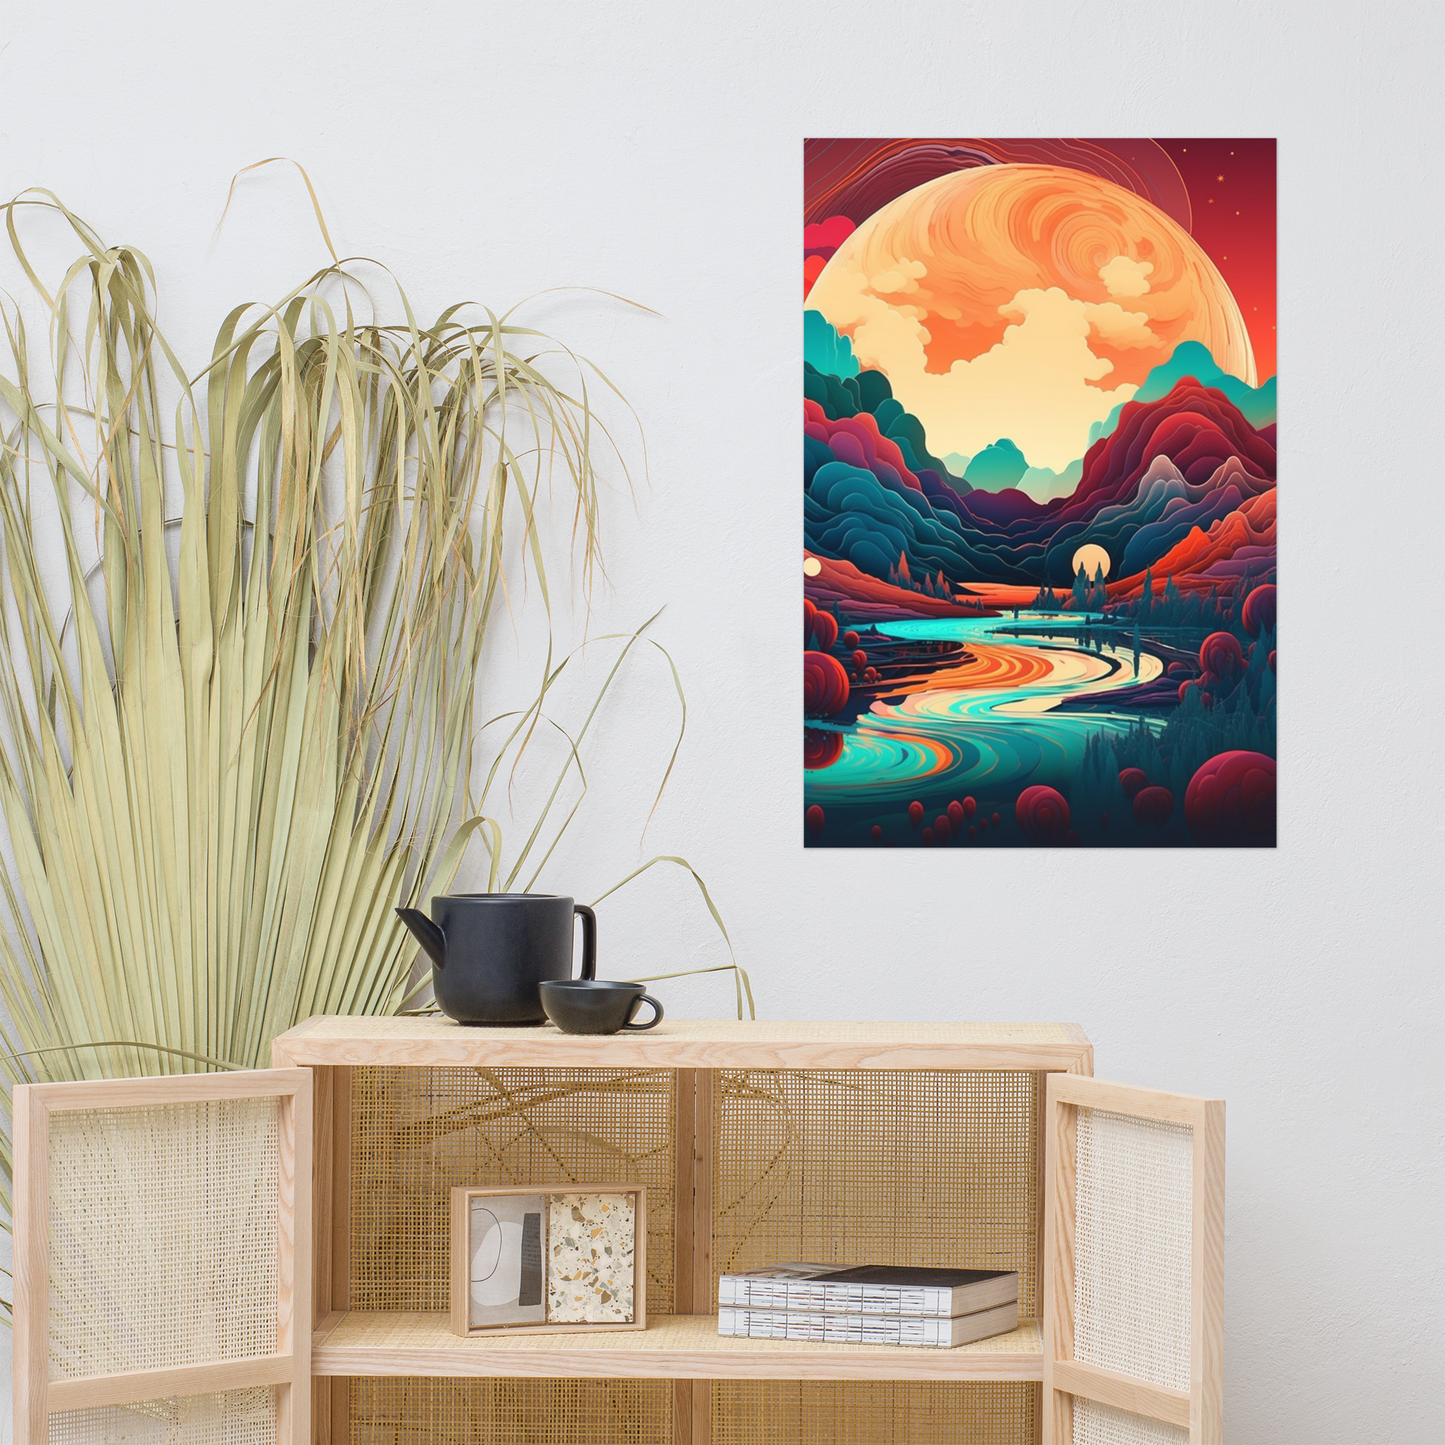 Stunning Extraterrestrial Landscape Poster Art: Fiery Sunset Between Two Mountain Ranges